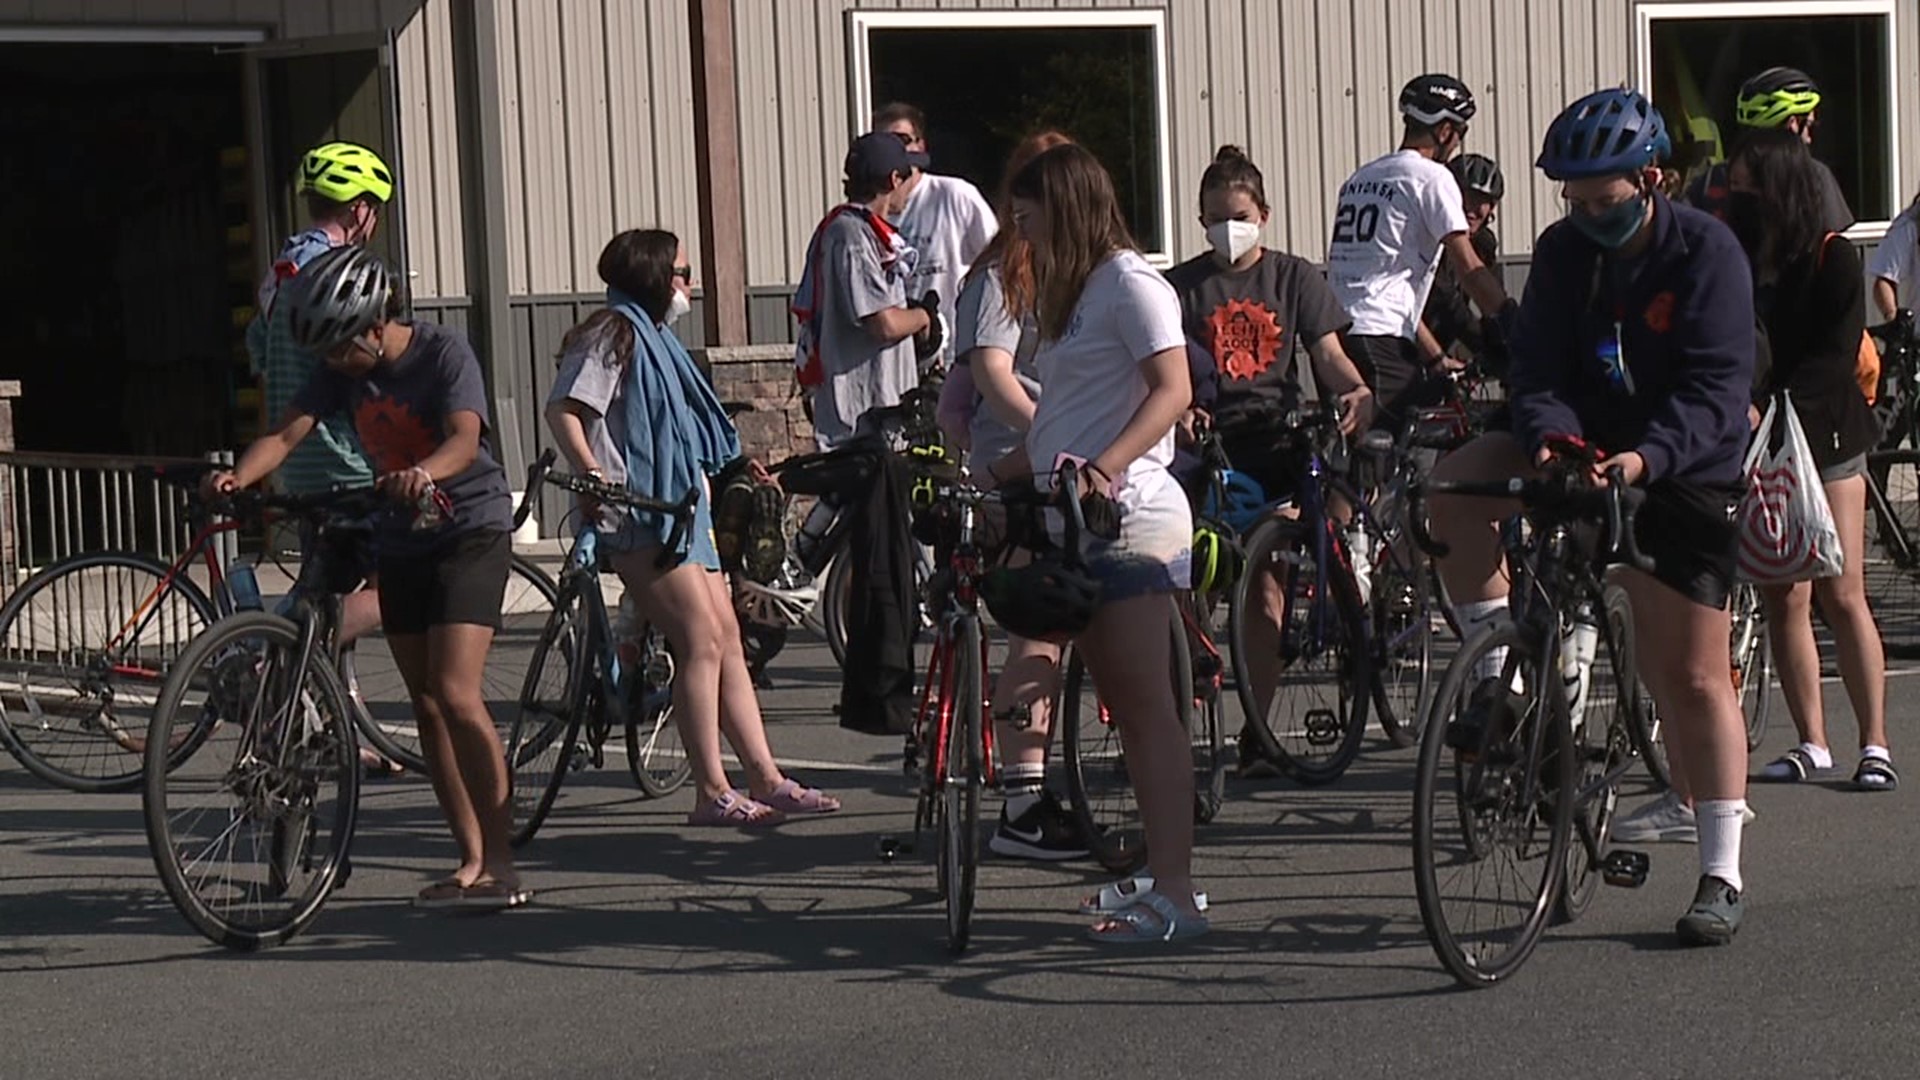 The bicycling team, known as the Illini 4000, raises money for cancer research.